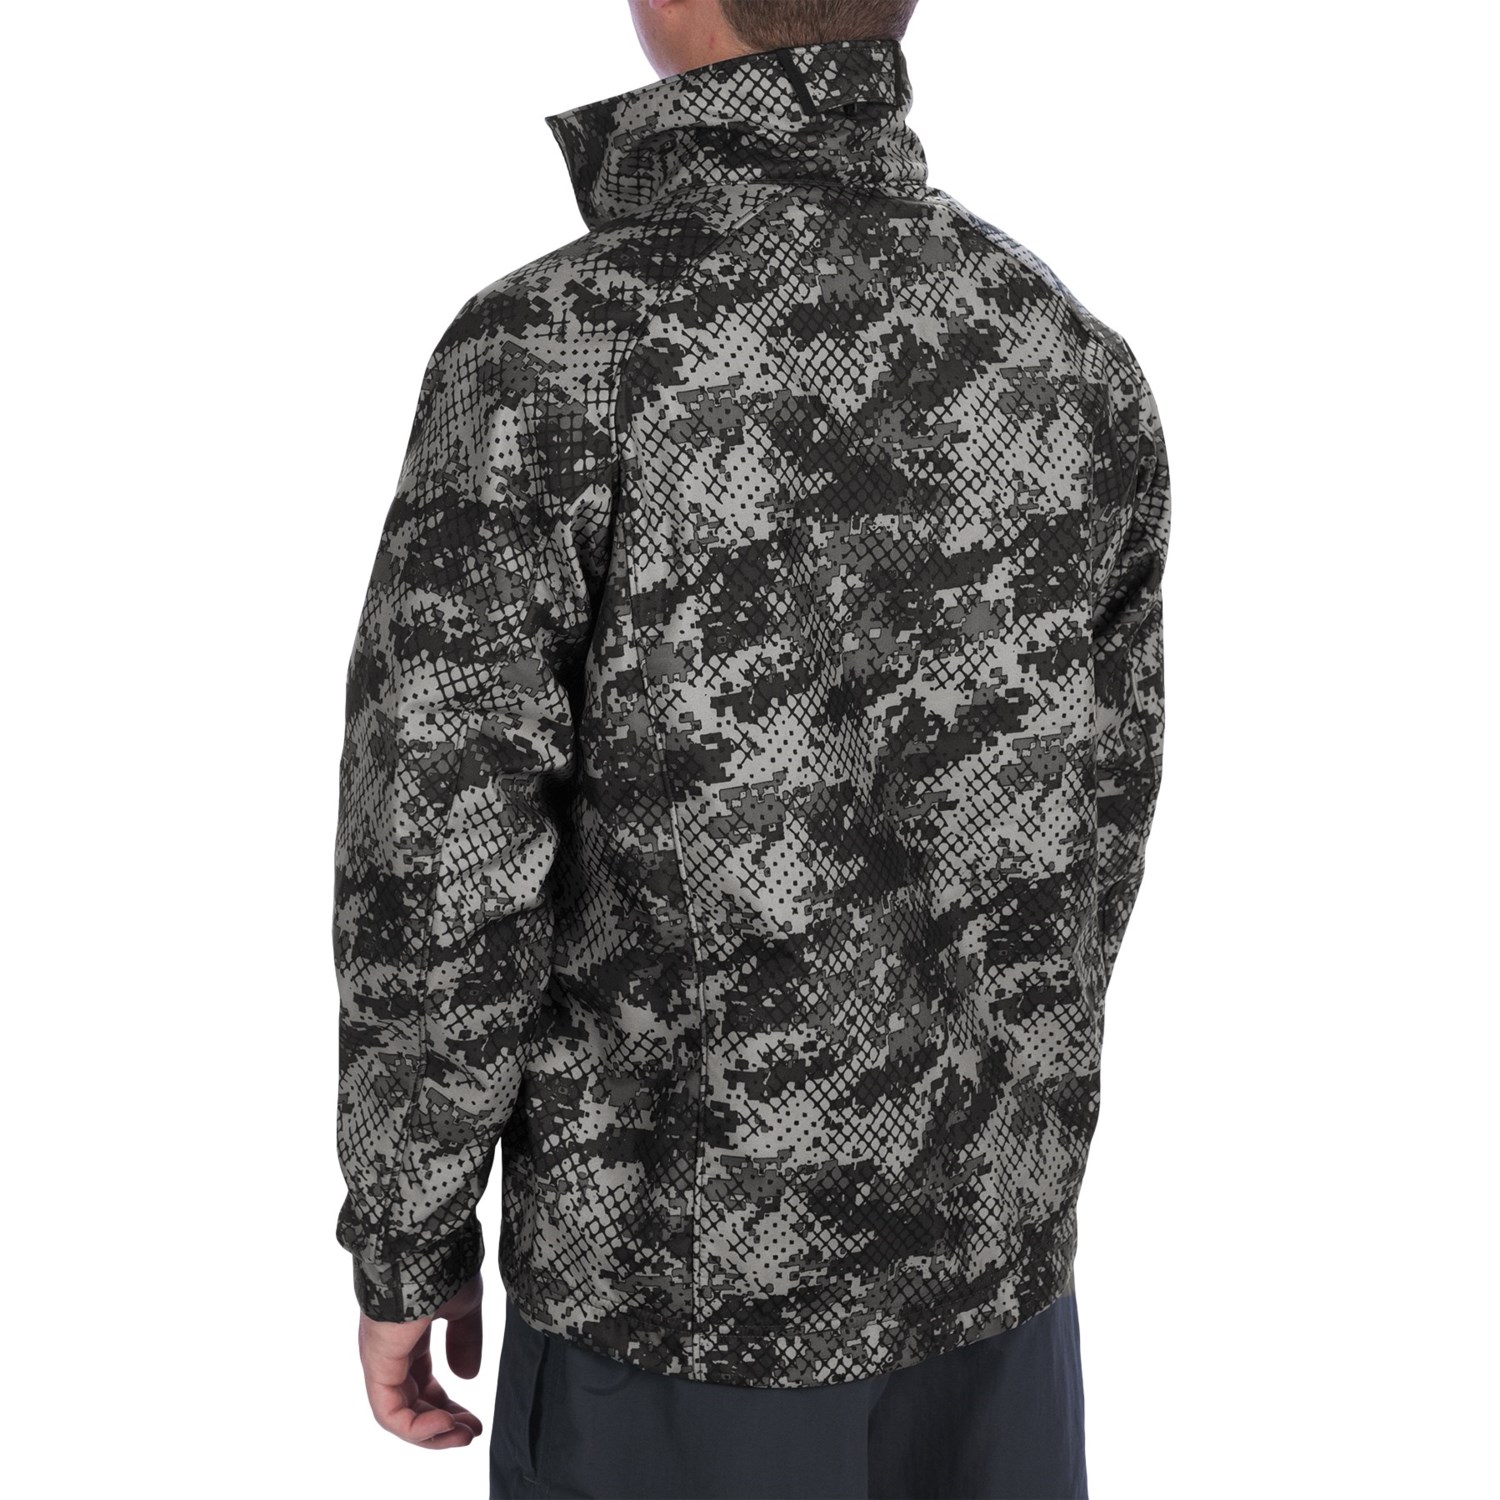 Simms Windstopper® Catch Camo Soft Shell Jacket (For Men) 8259D - Save 30%